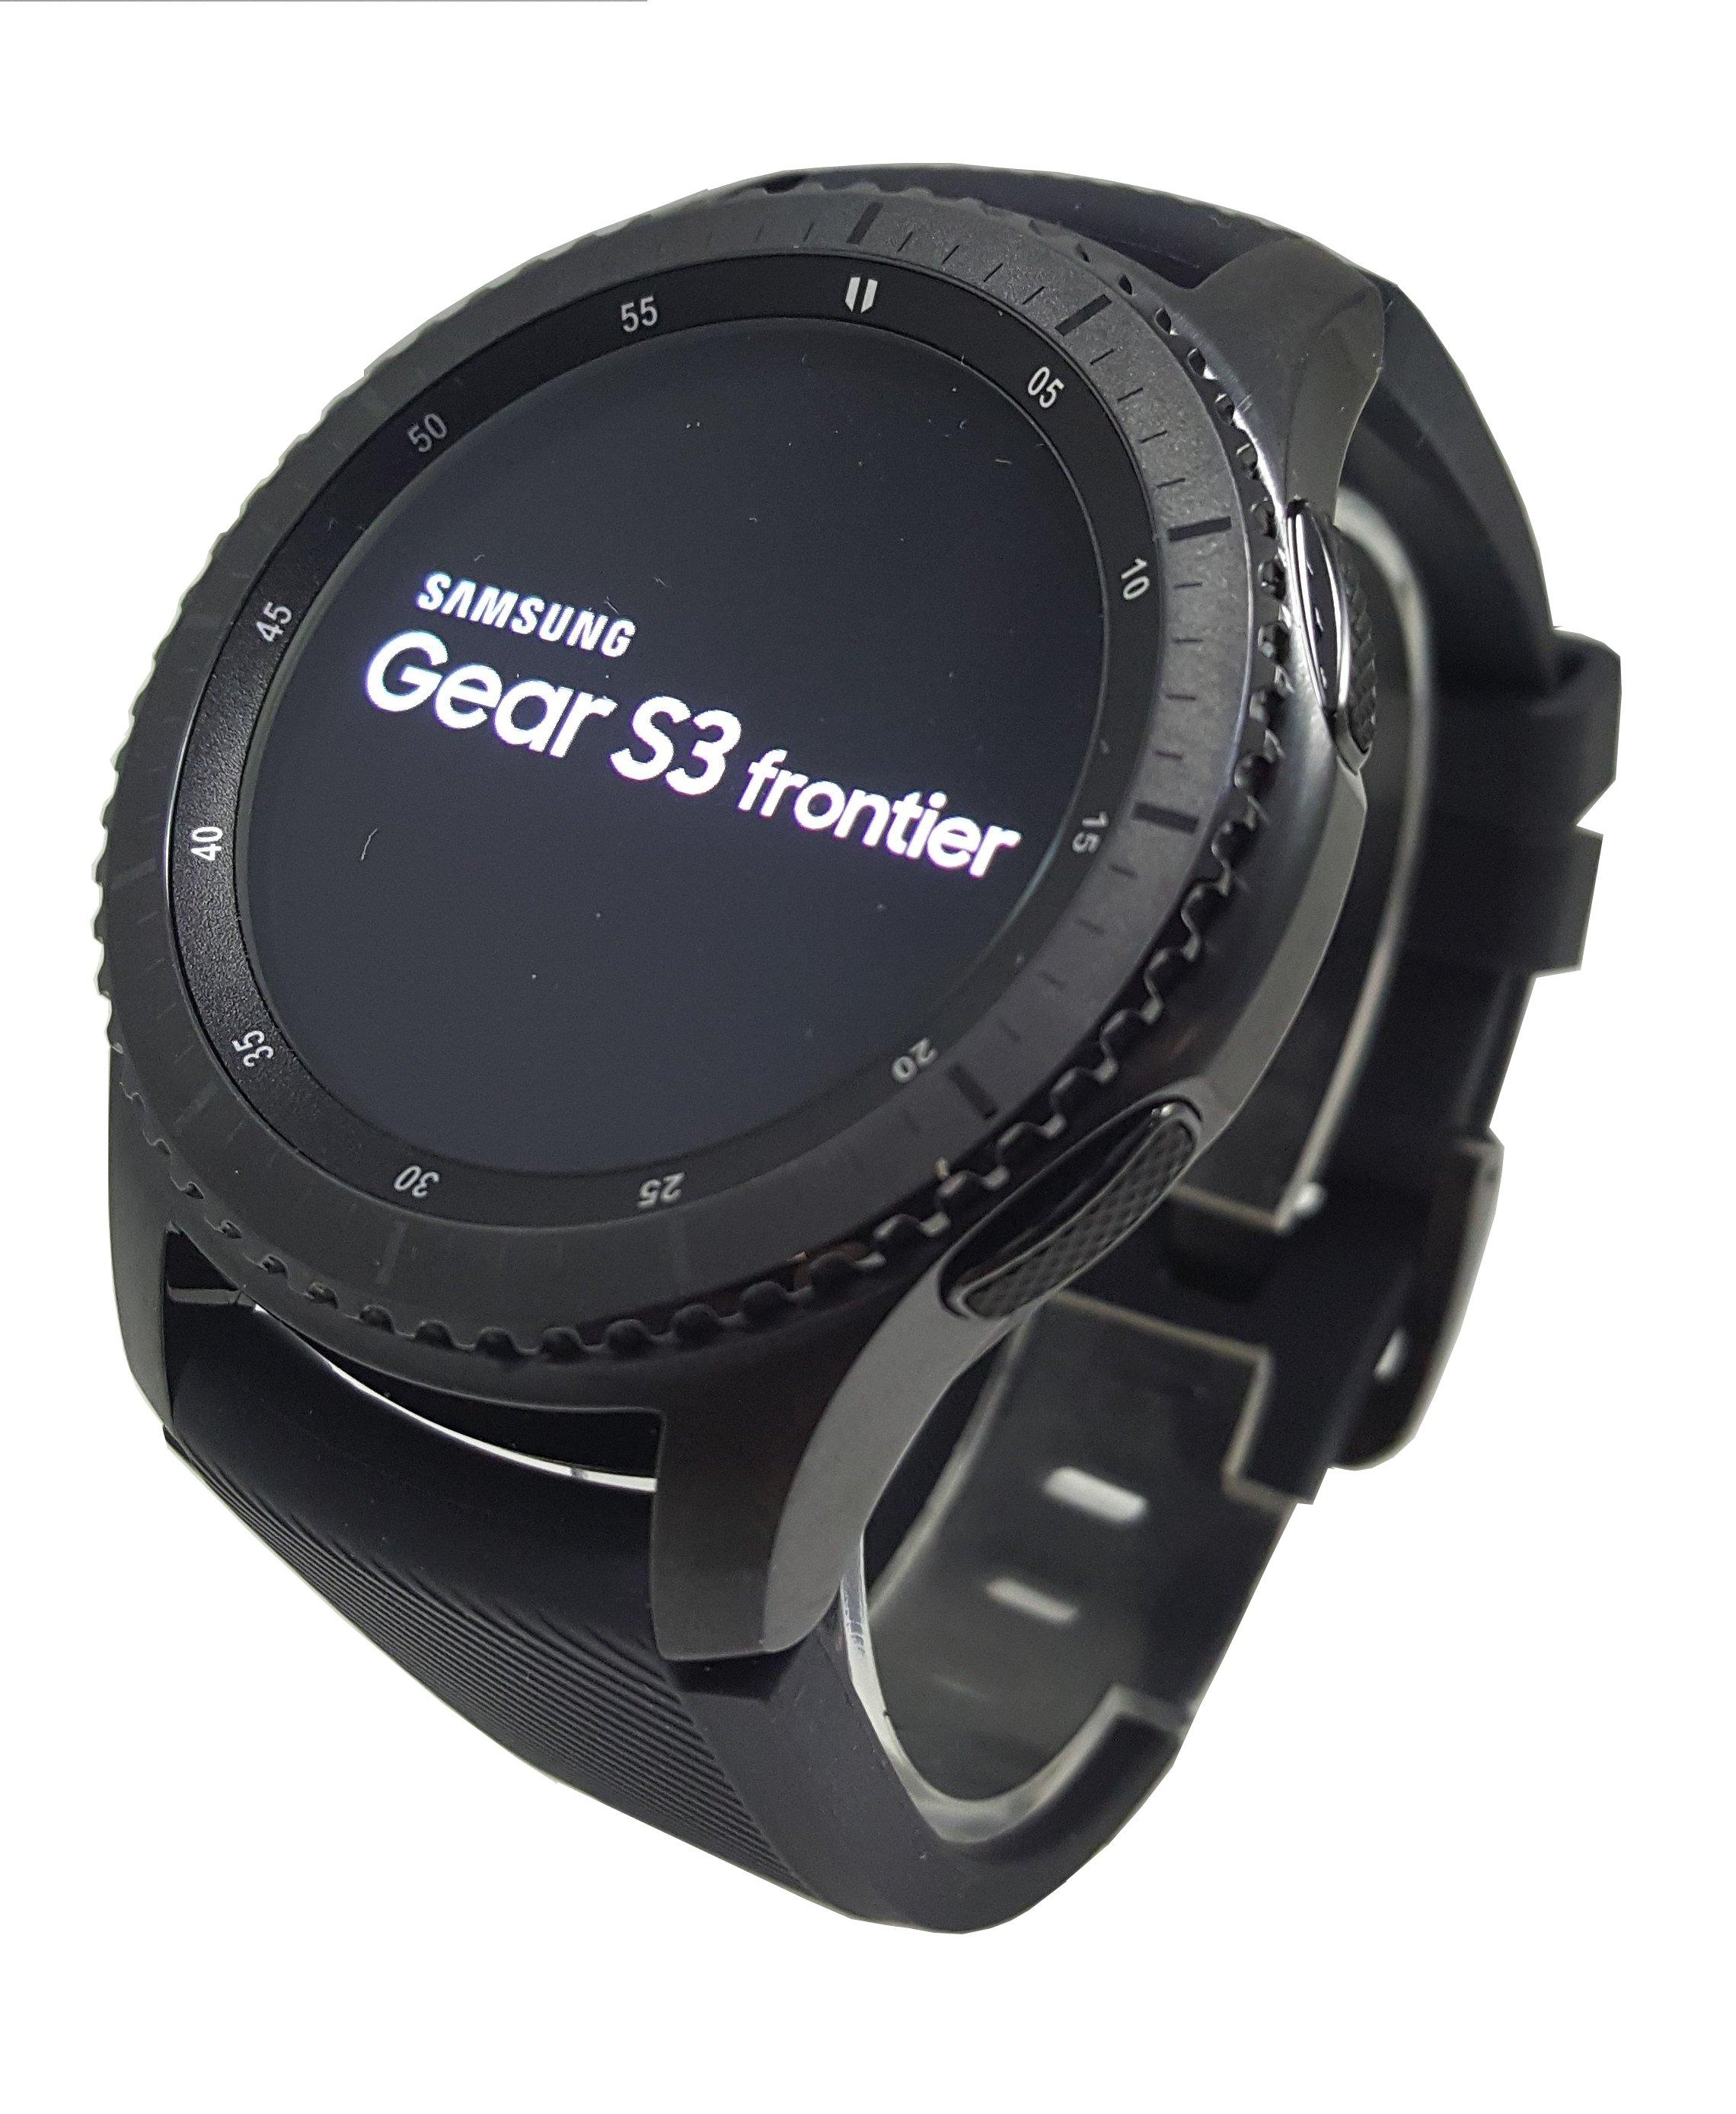 samsung gear s3 frontier pay monthly